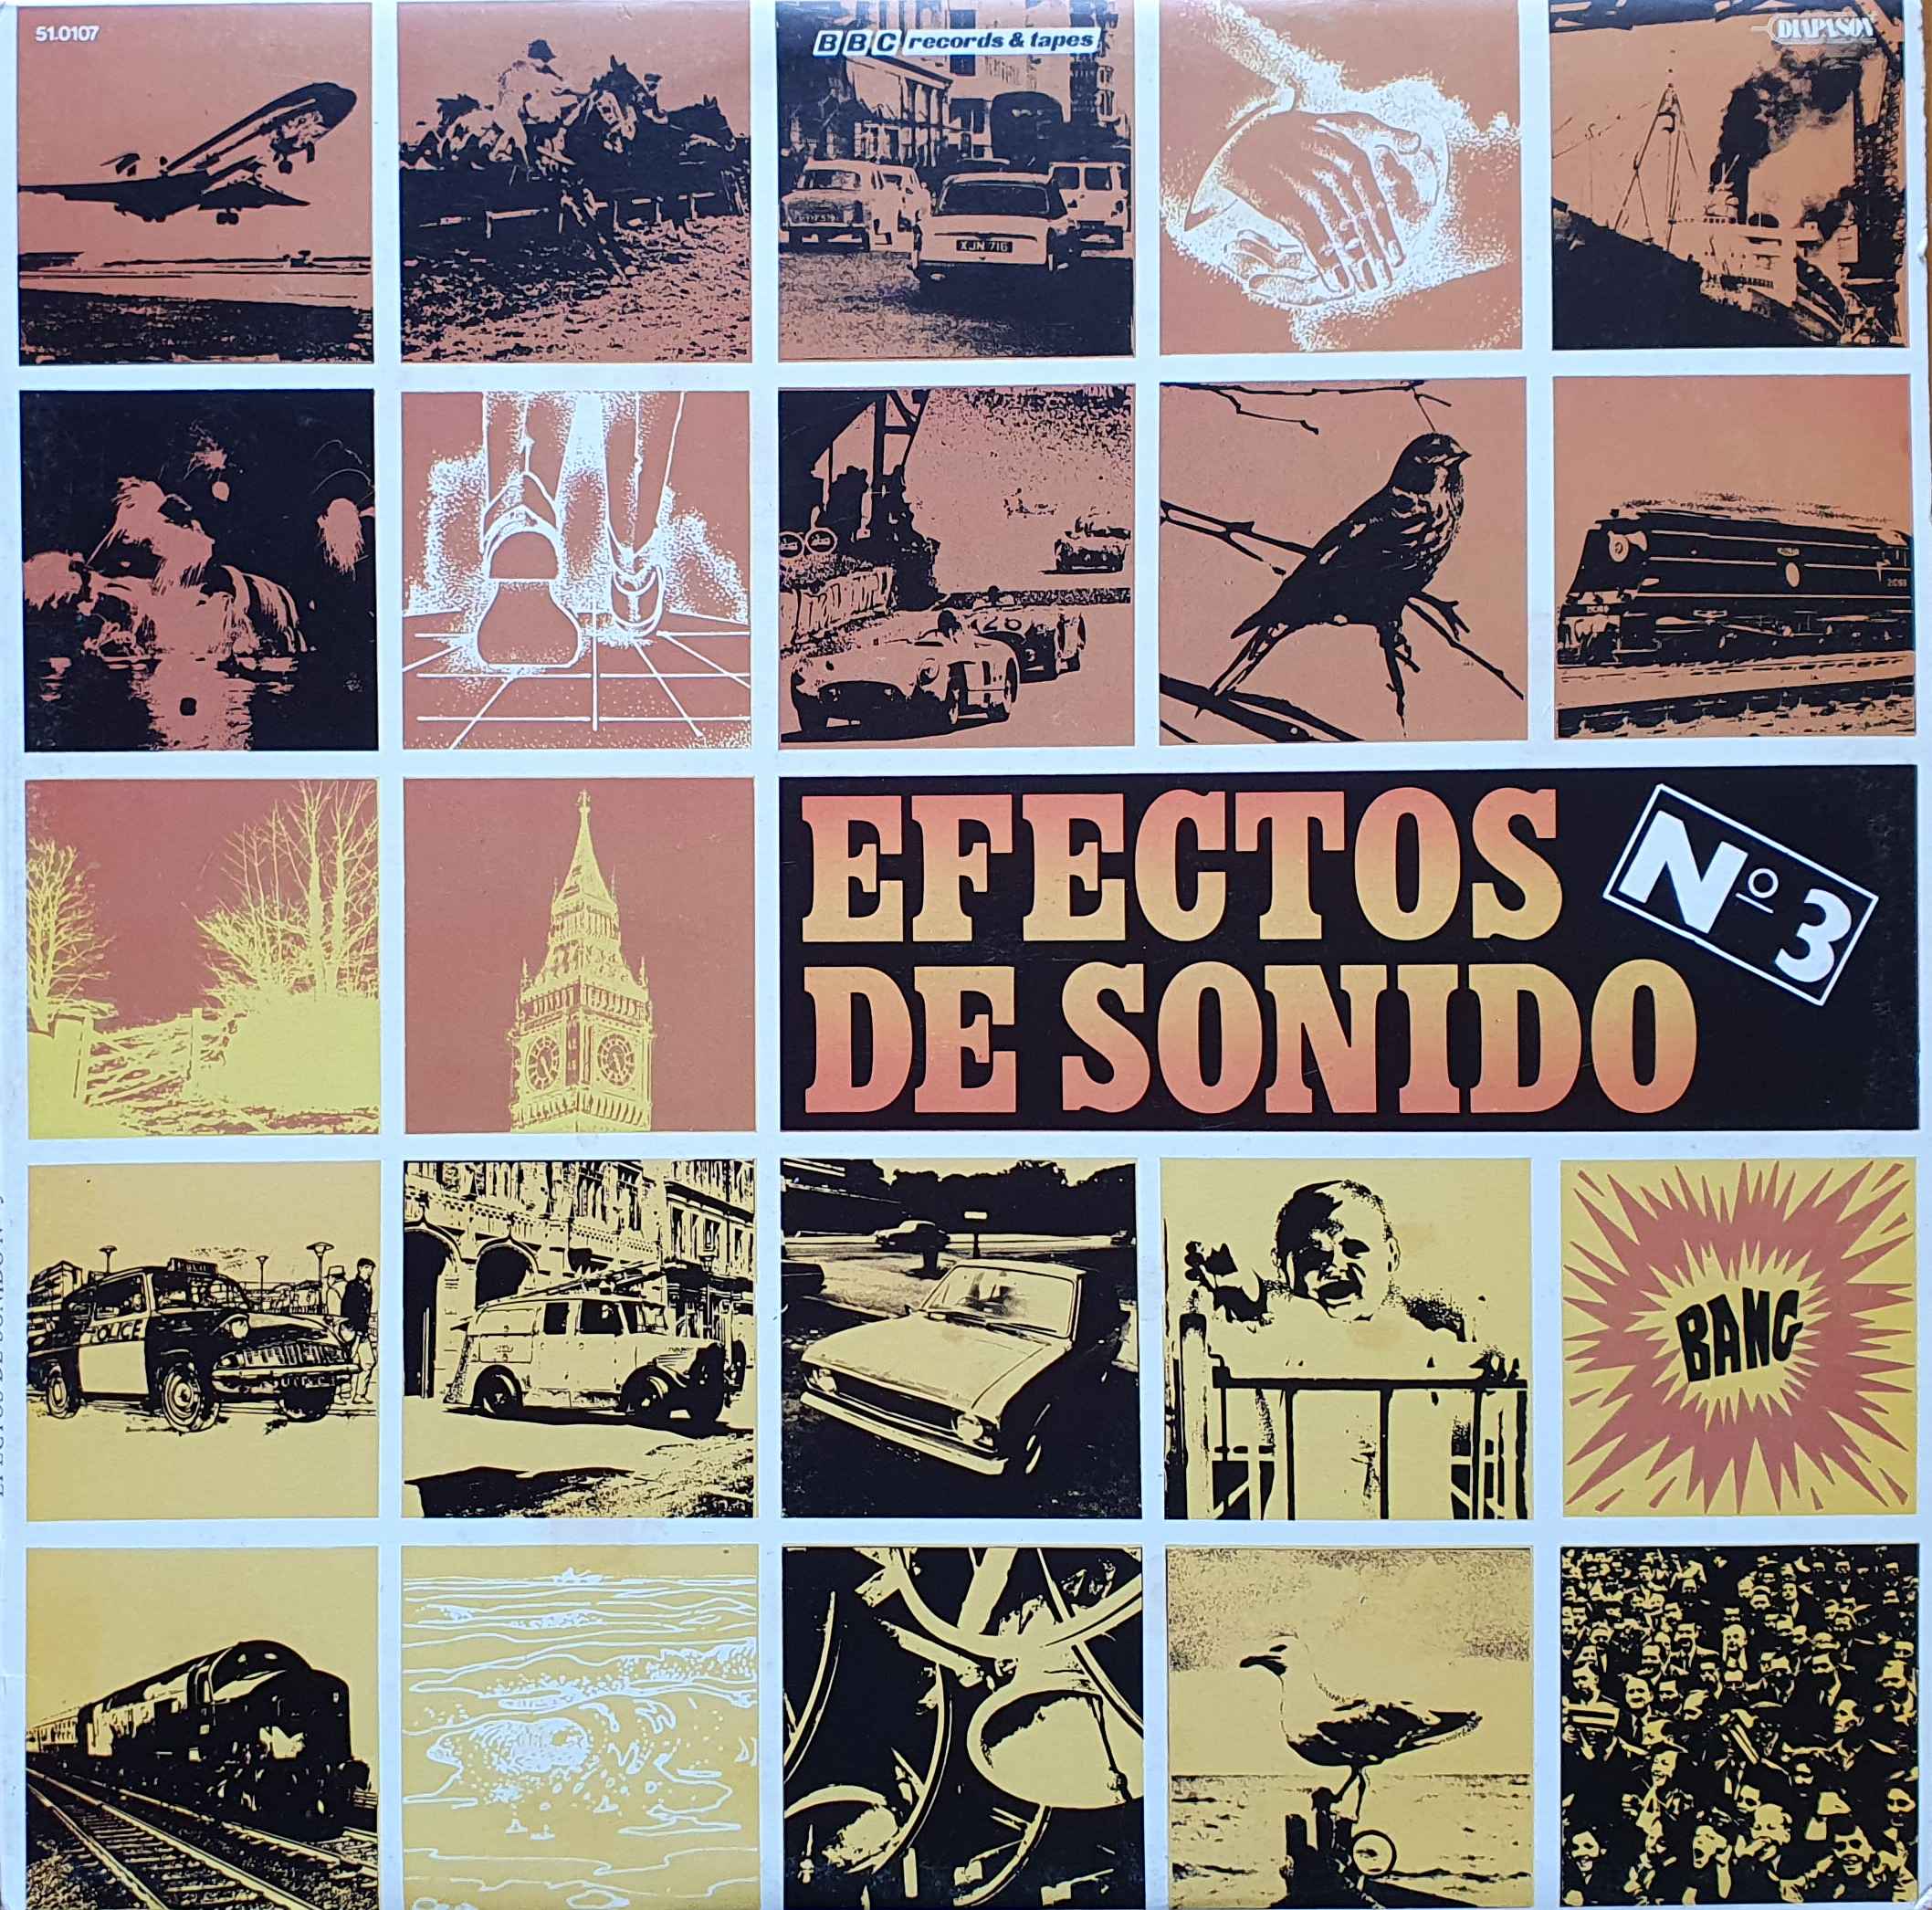 Picture of 51.0107 Efectos de sonido No 3 (Spanish import) by artist Various from the BBC albums - Records and Tapes library